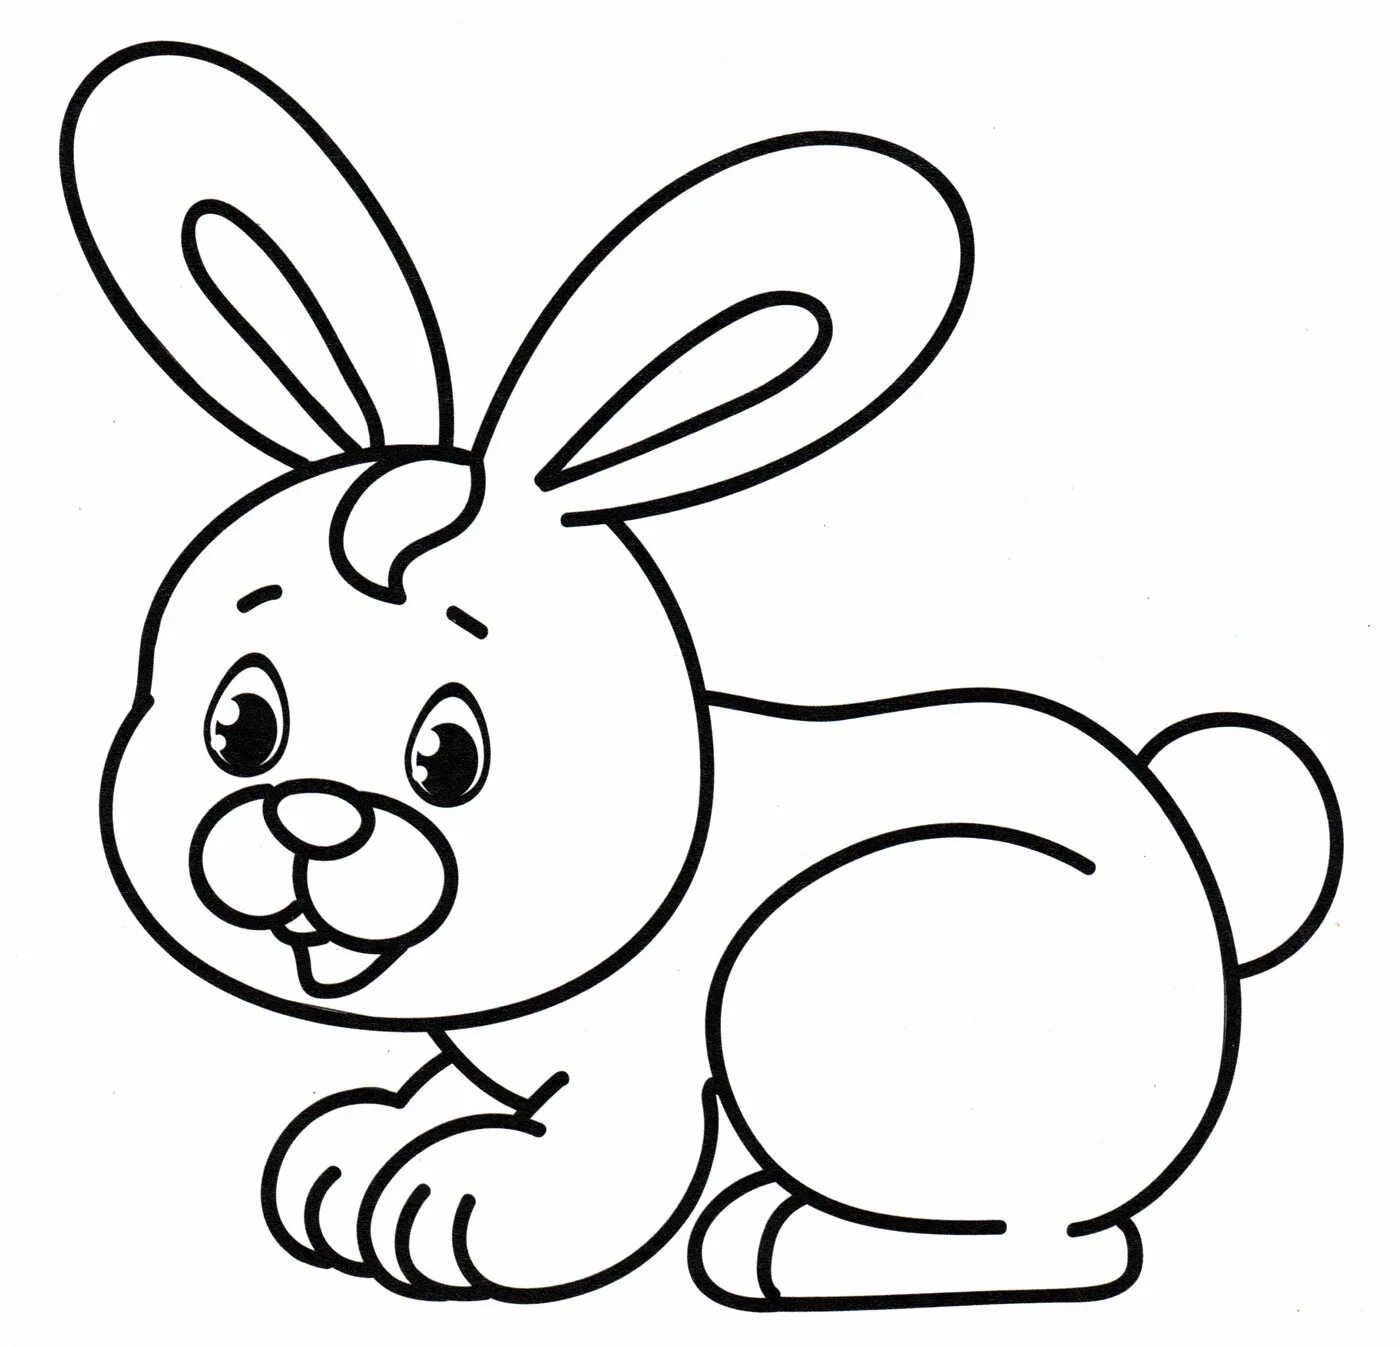 Bunny for children 2 3 years old #7